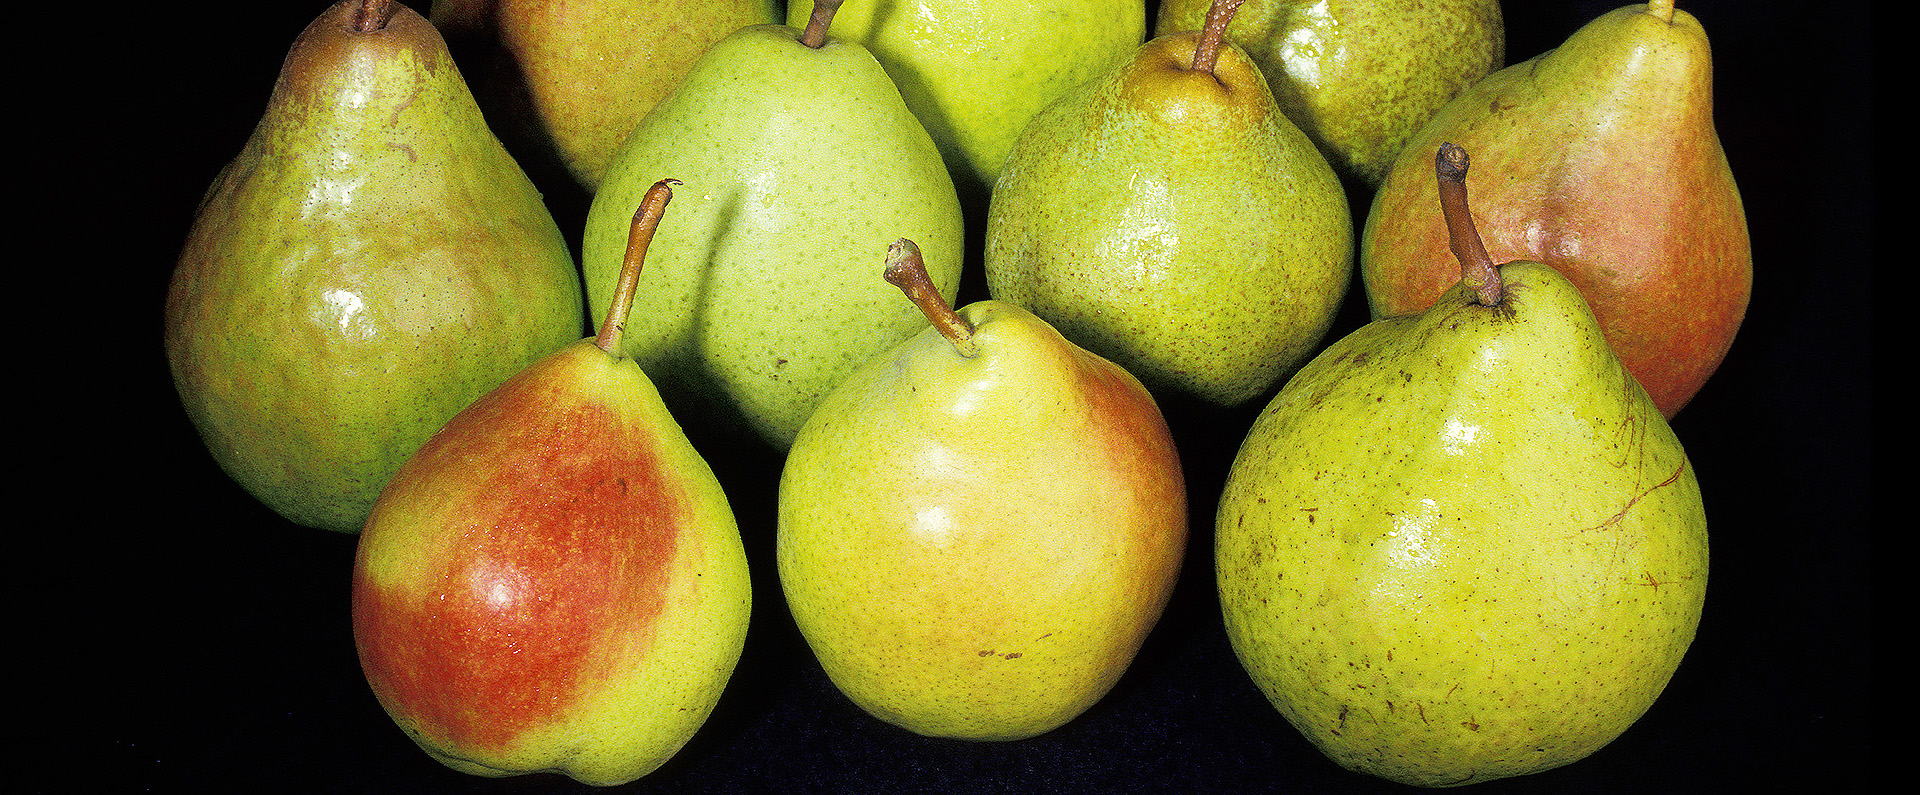 A group of 10 pears